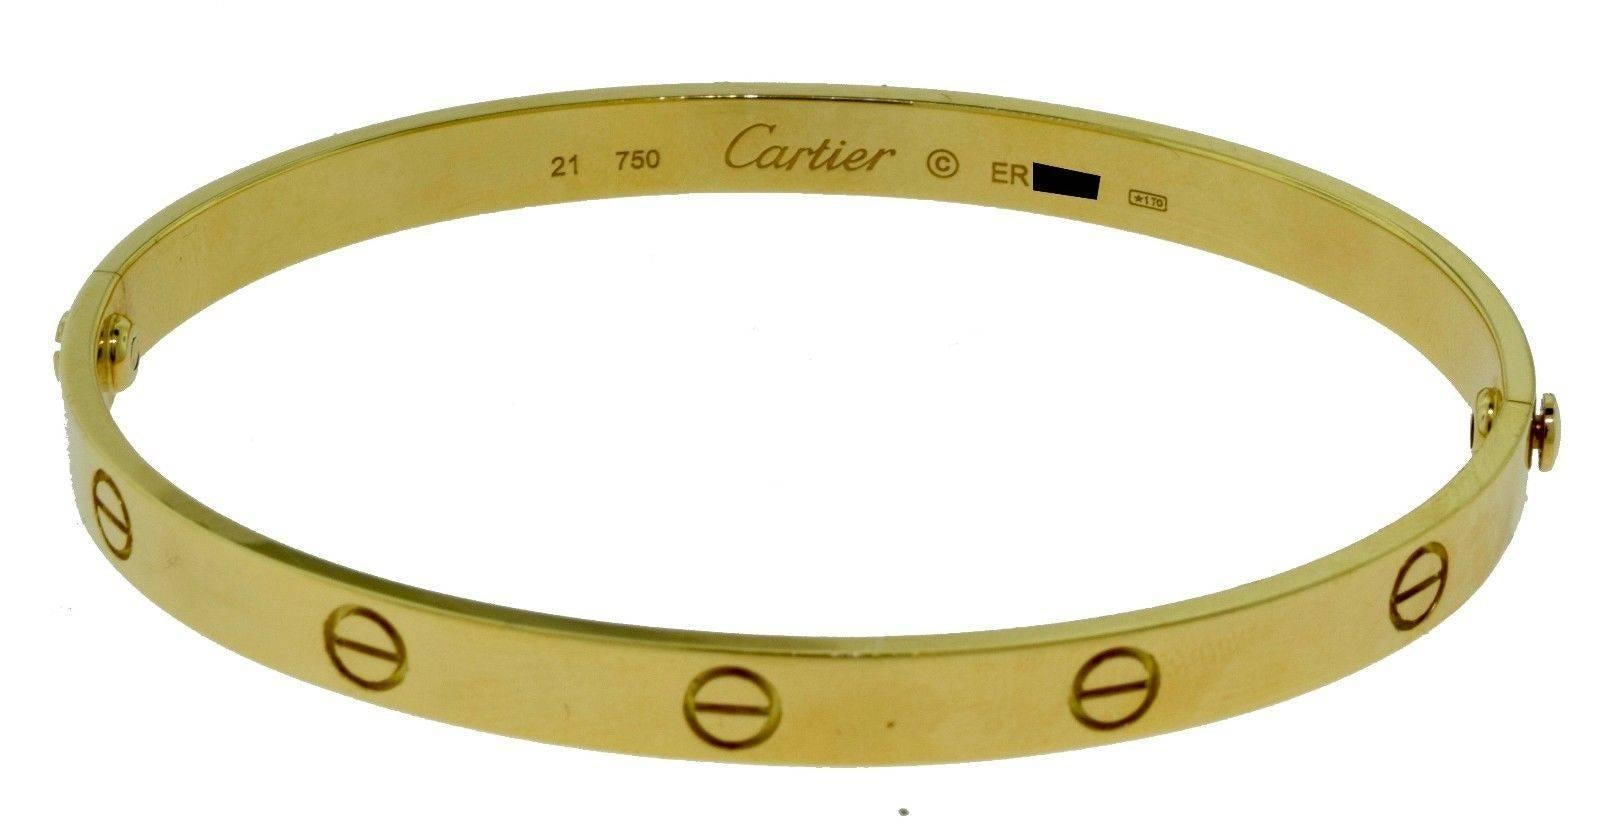 Brand: Cartier
Collection: LOVE
Metal: Yellow Gold
Metal Purity: 18k
Total Item Weight (grams): 37.2
Size: 21
Screw: Old Screw
Hallmark: 21, 750, Serial Number
Signature: Cartier
Includes: Box 